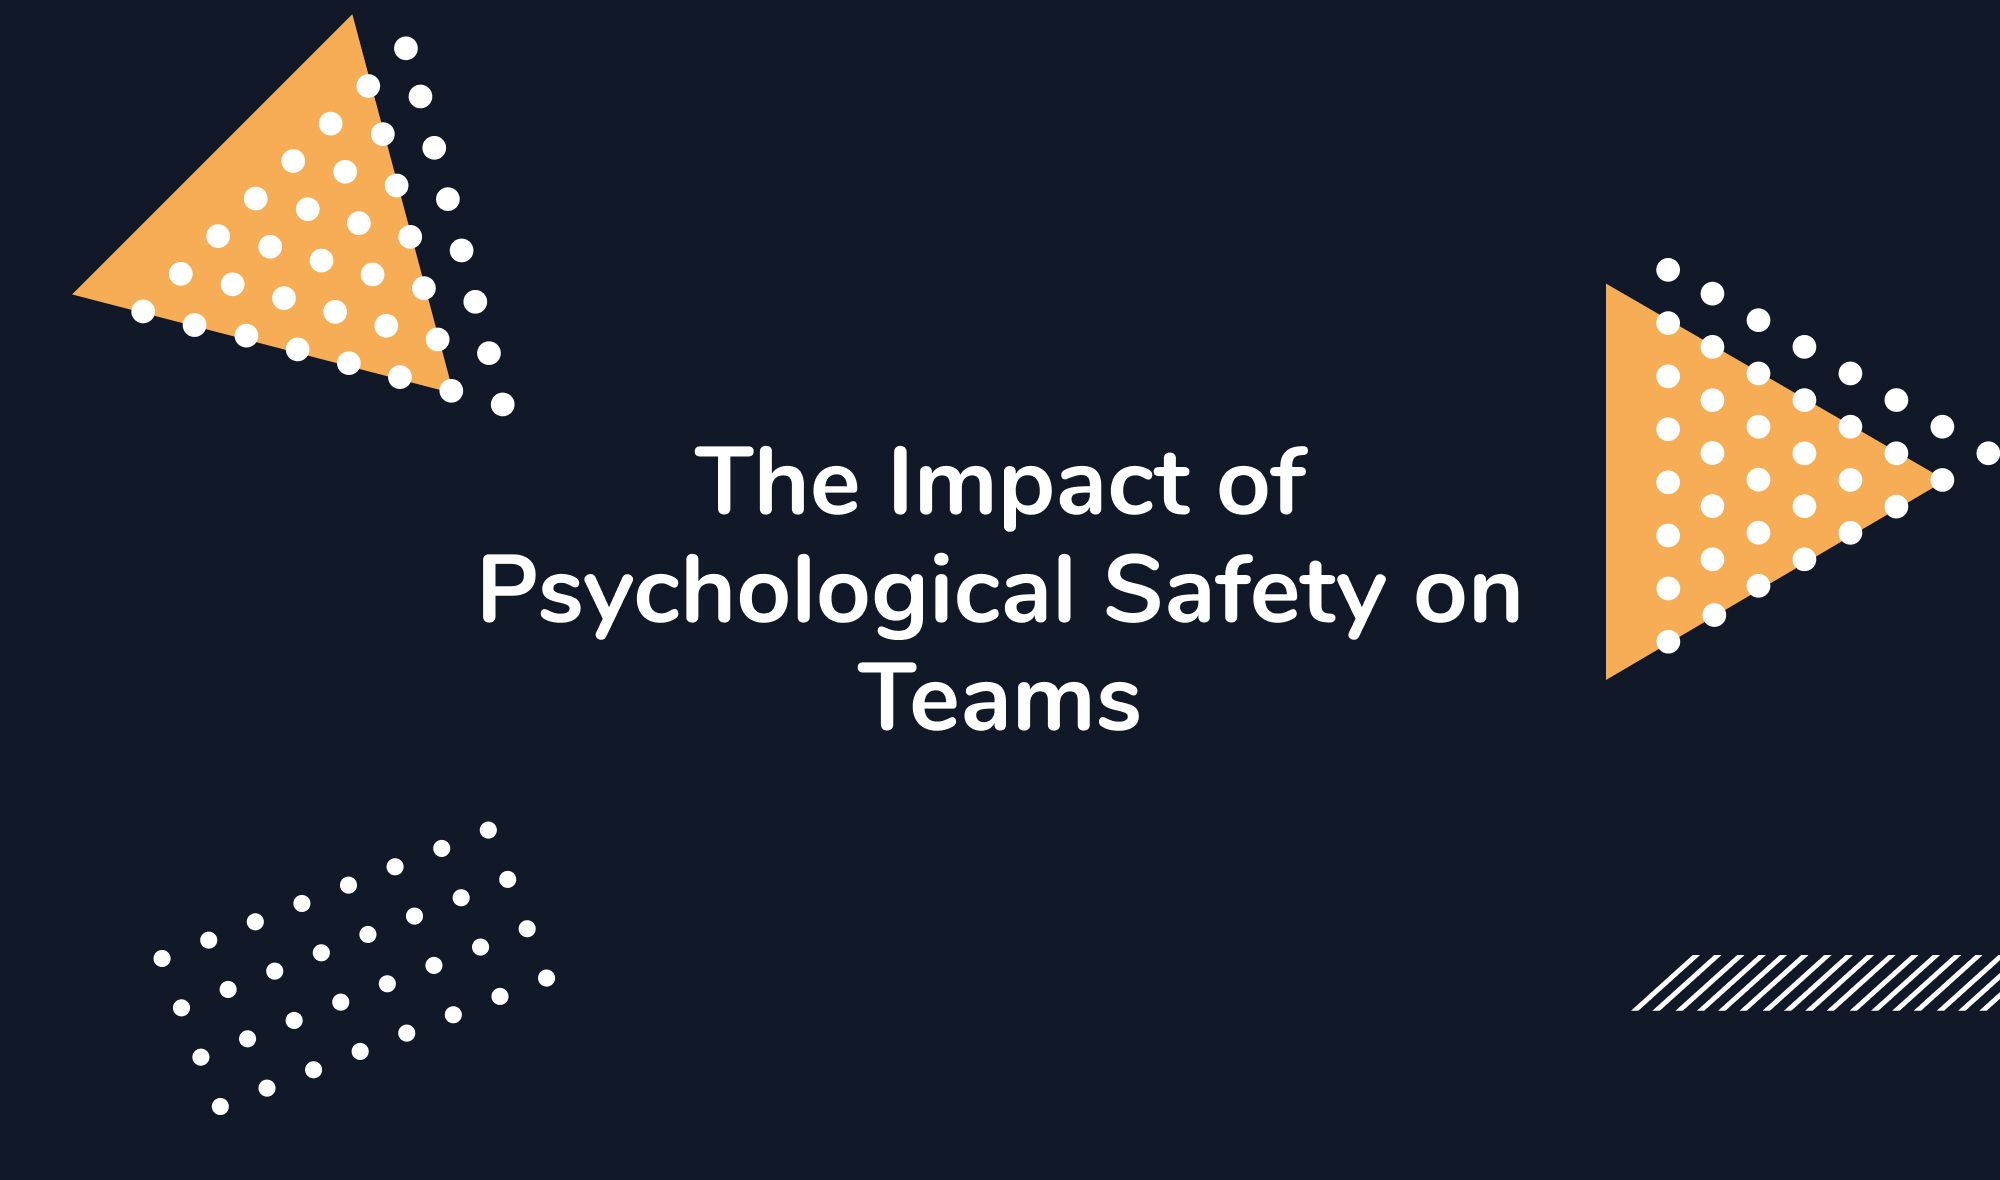 The Impact of Psychological Safety on Teams